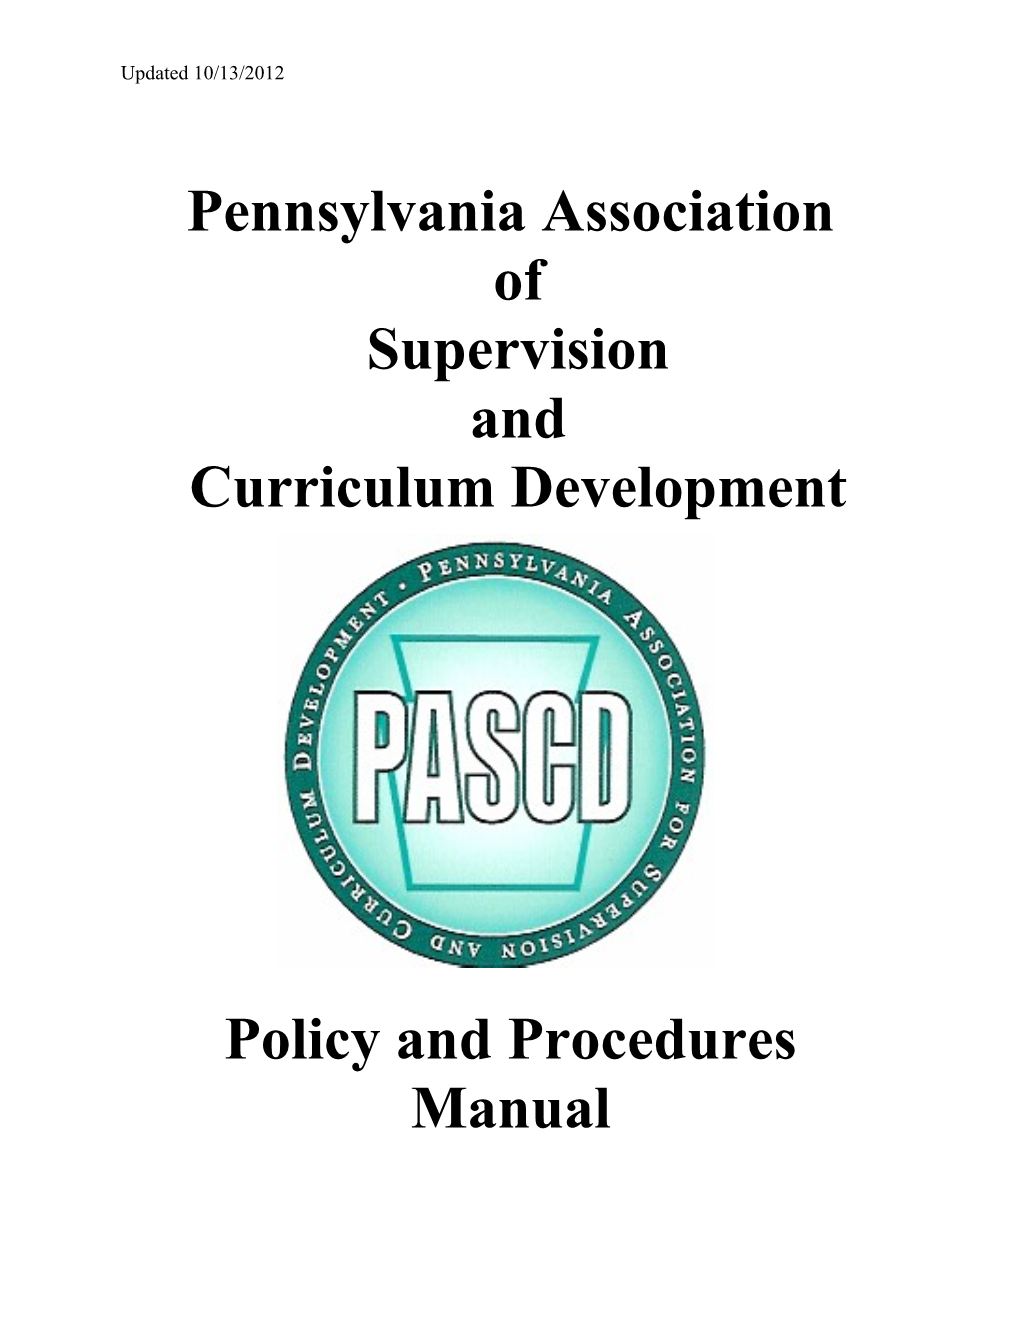 PASCD Policy and Procedures Manual